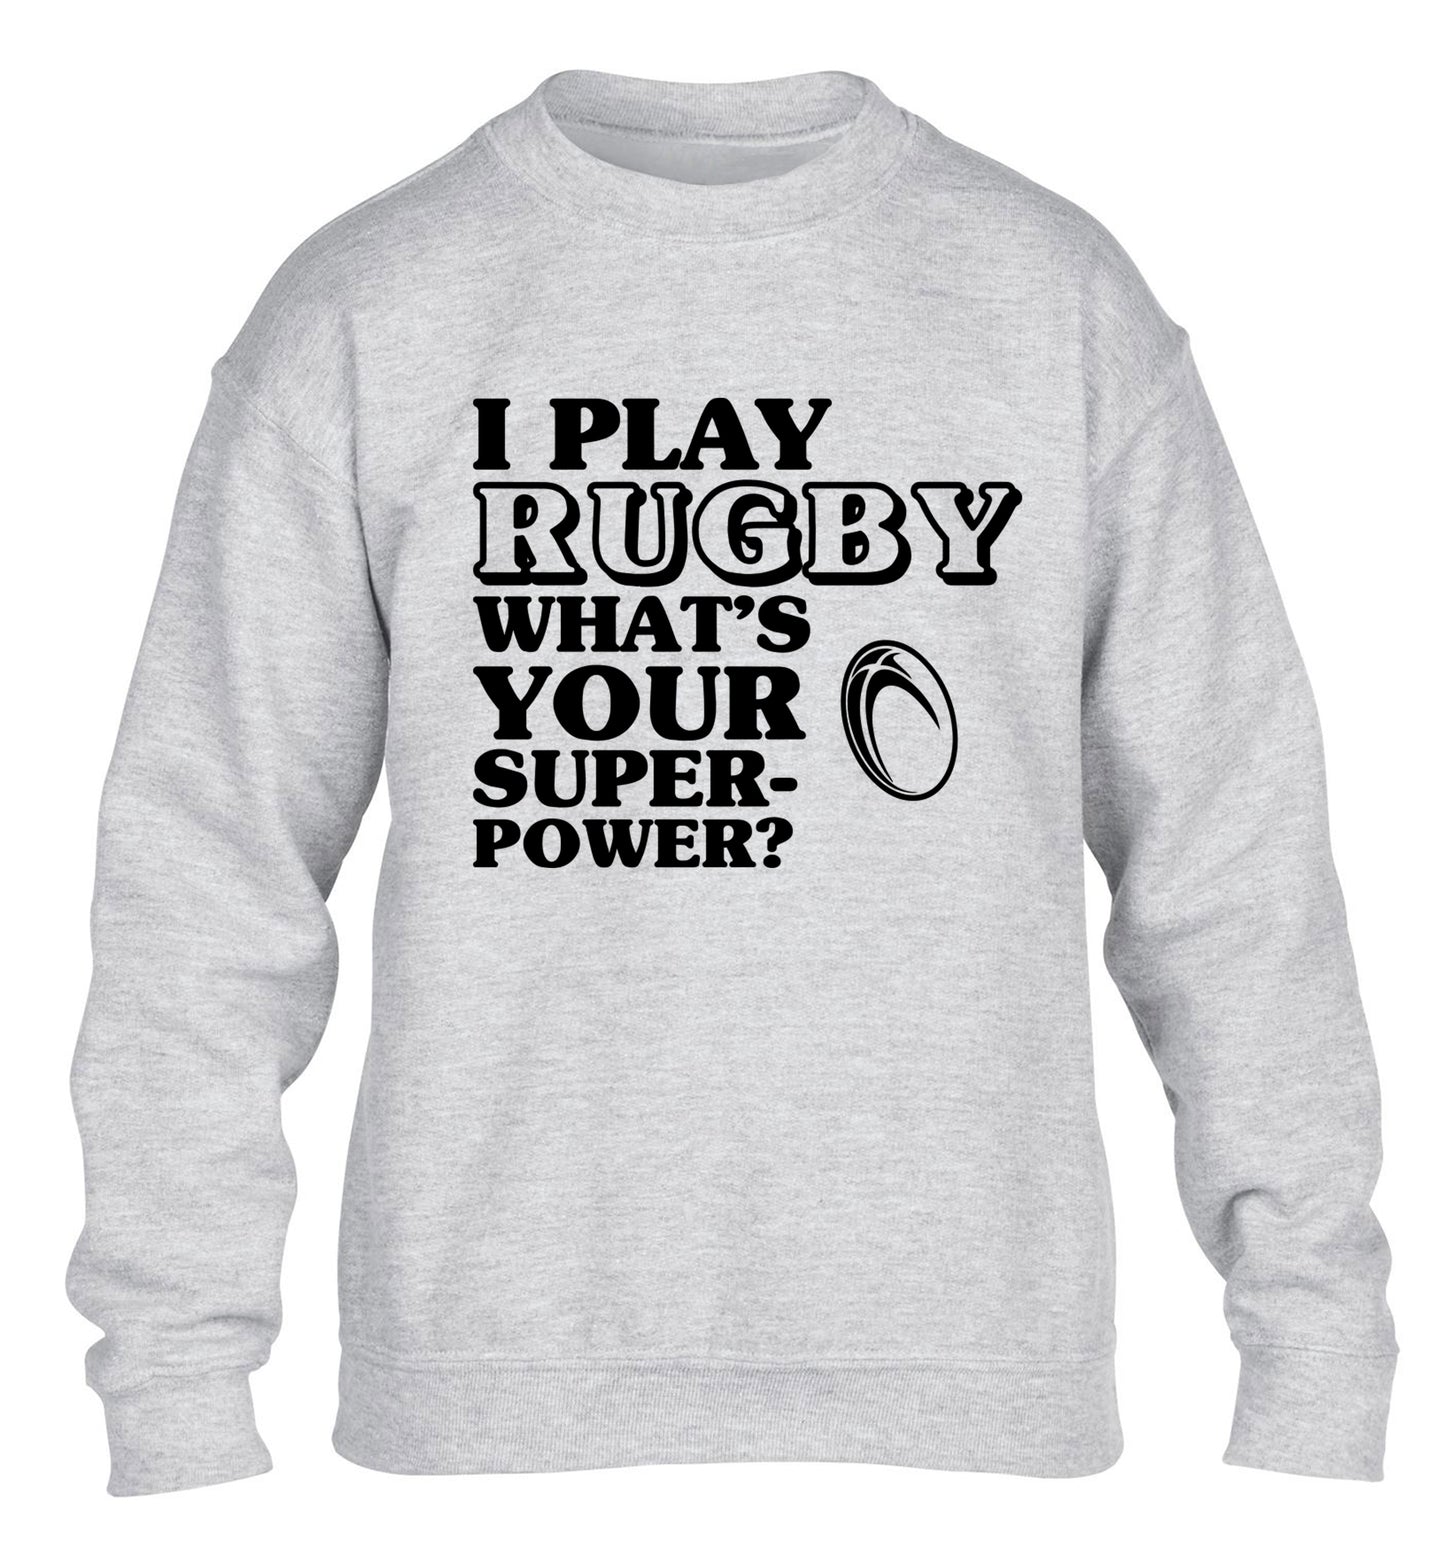 I play rugby what's your superpower? children's grey sweater 12-13 Years